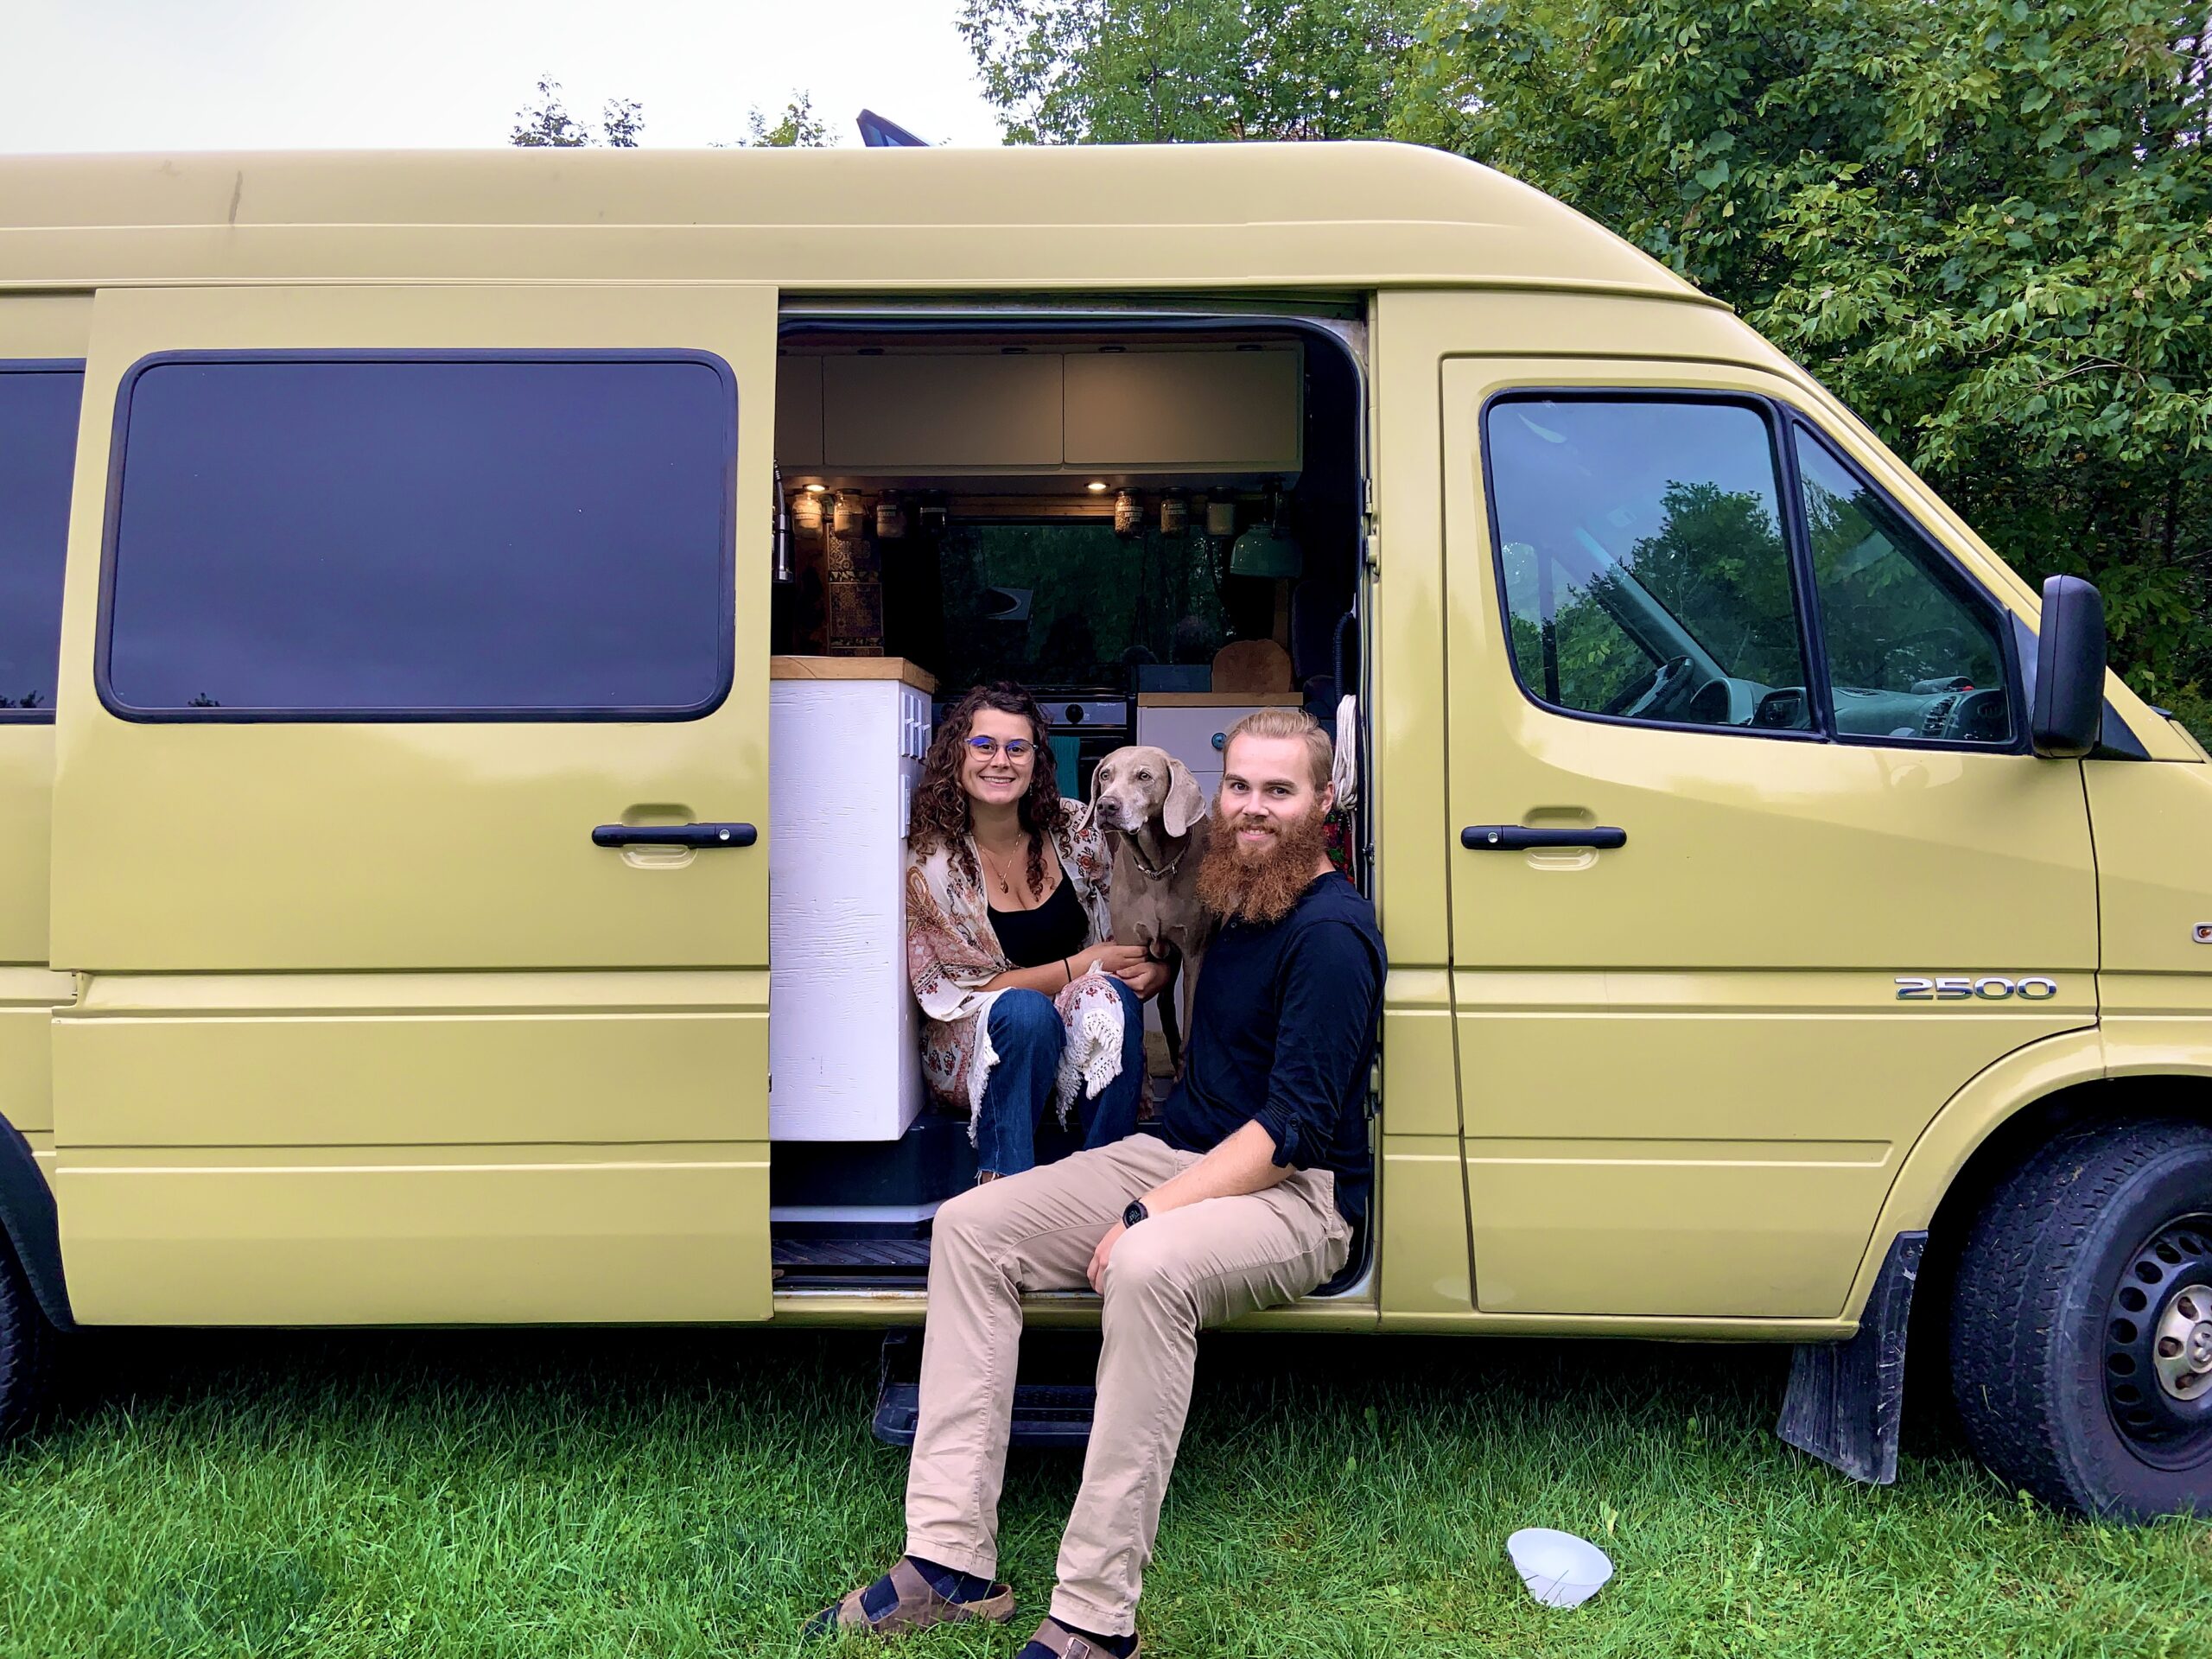 DIY Van Conversion Done on a Budget for Full-Time Living